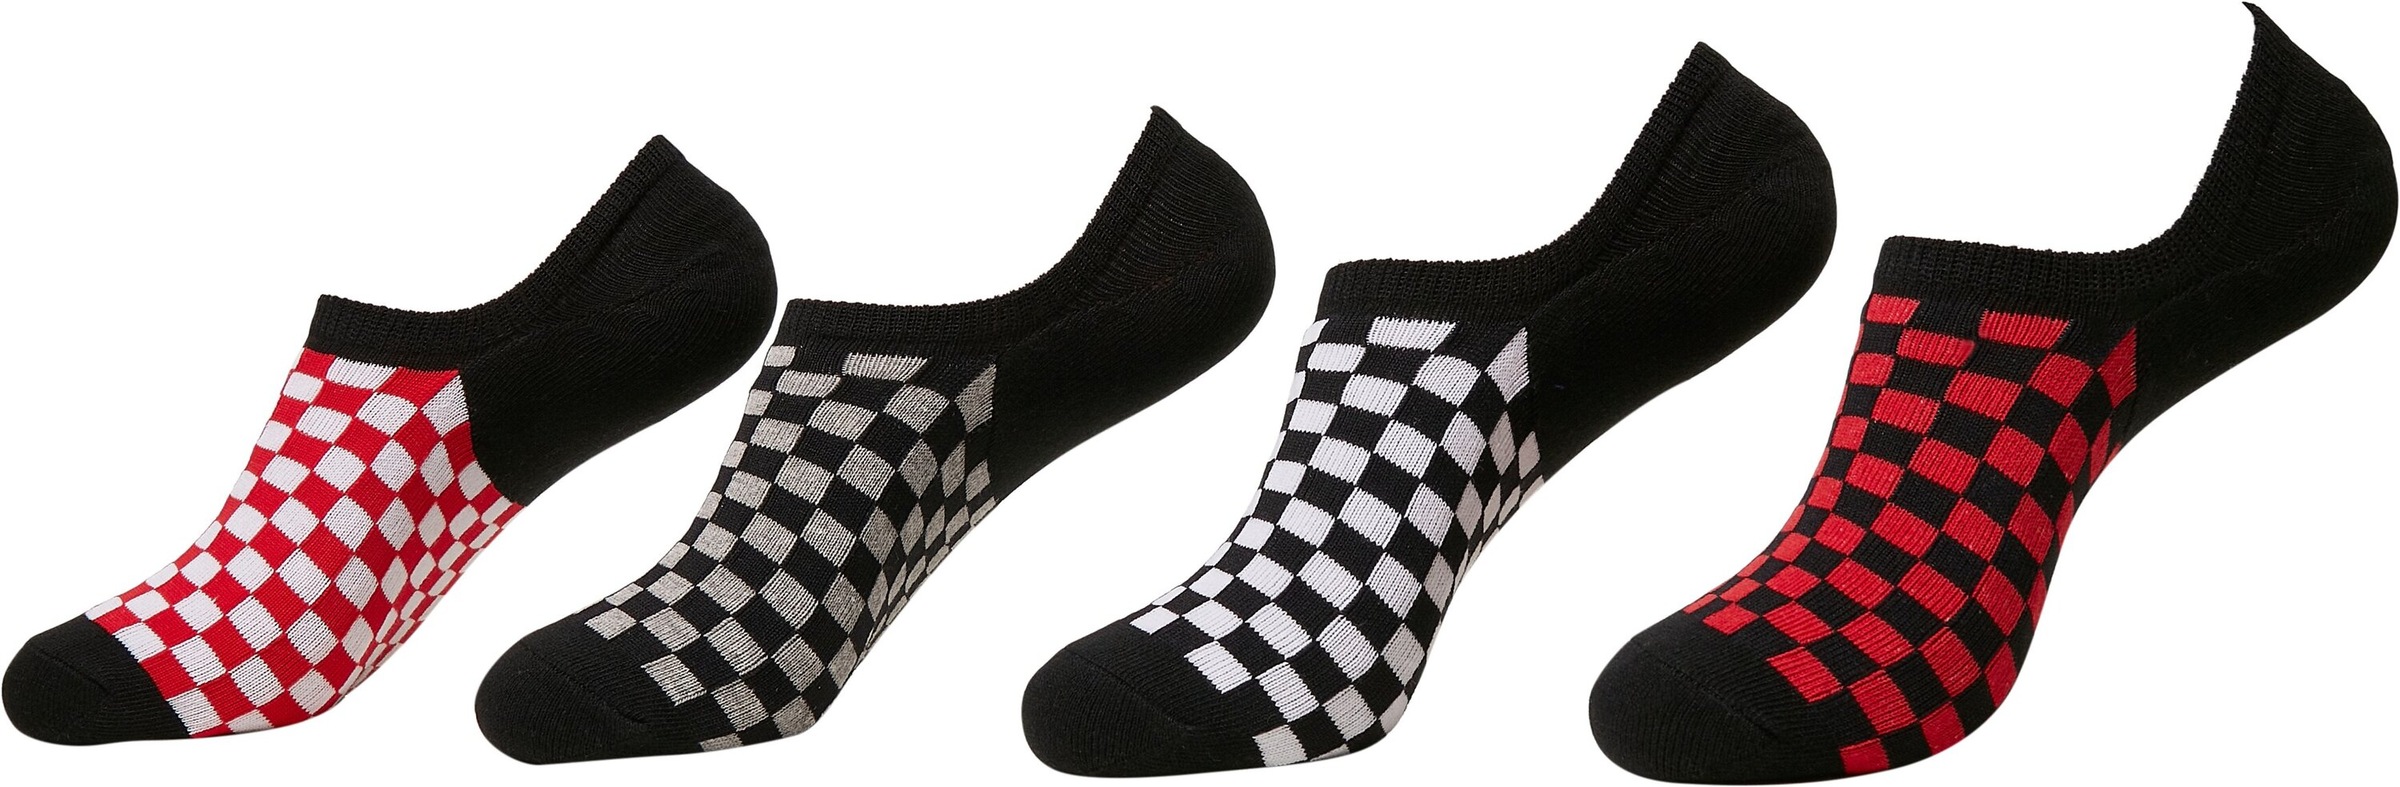 Freizeitsocken Socks Check (1 4-Pack Invisible Accessoires CLASSICS Paar) Recycled URBAN Yarn